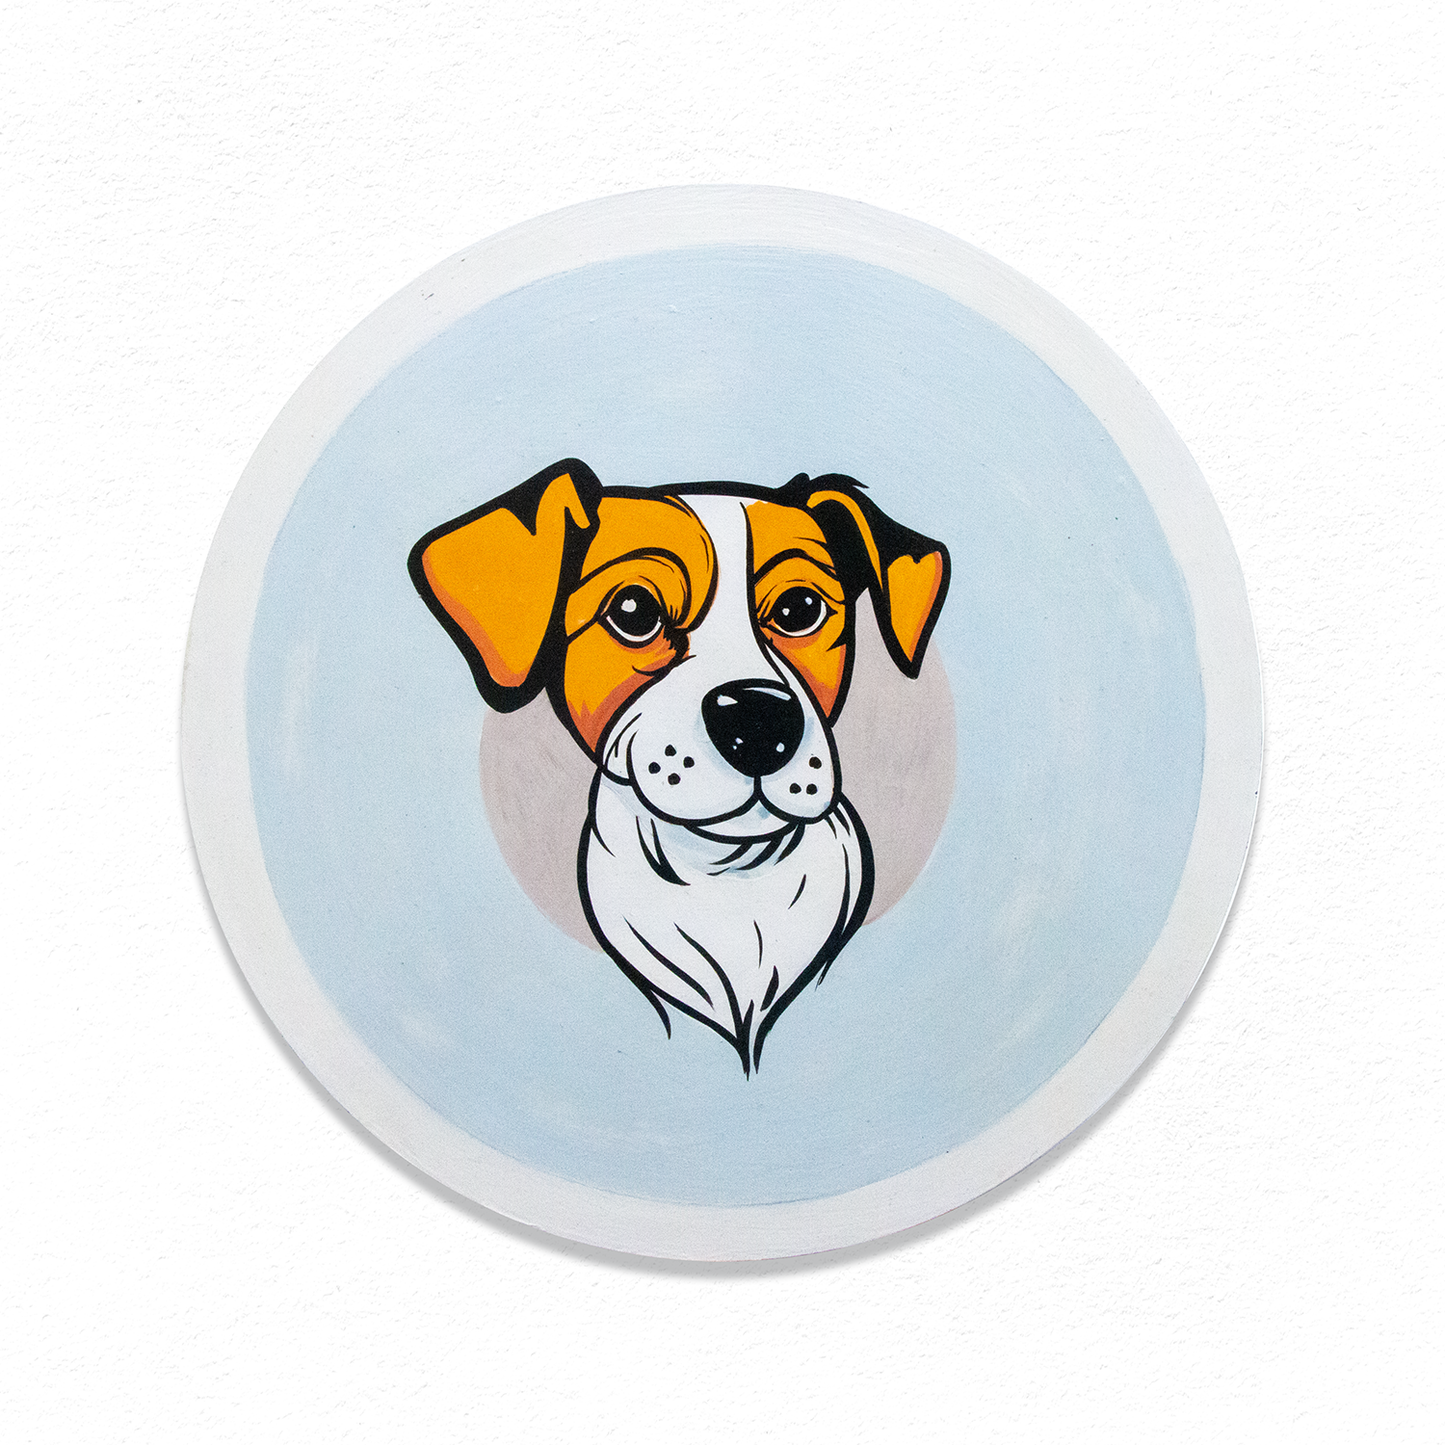 Hand Painting of Doggy - Home Decor